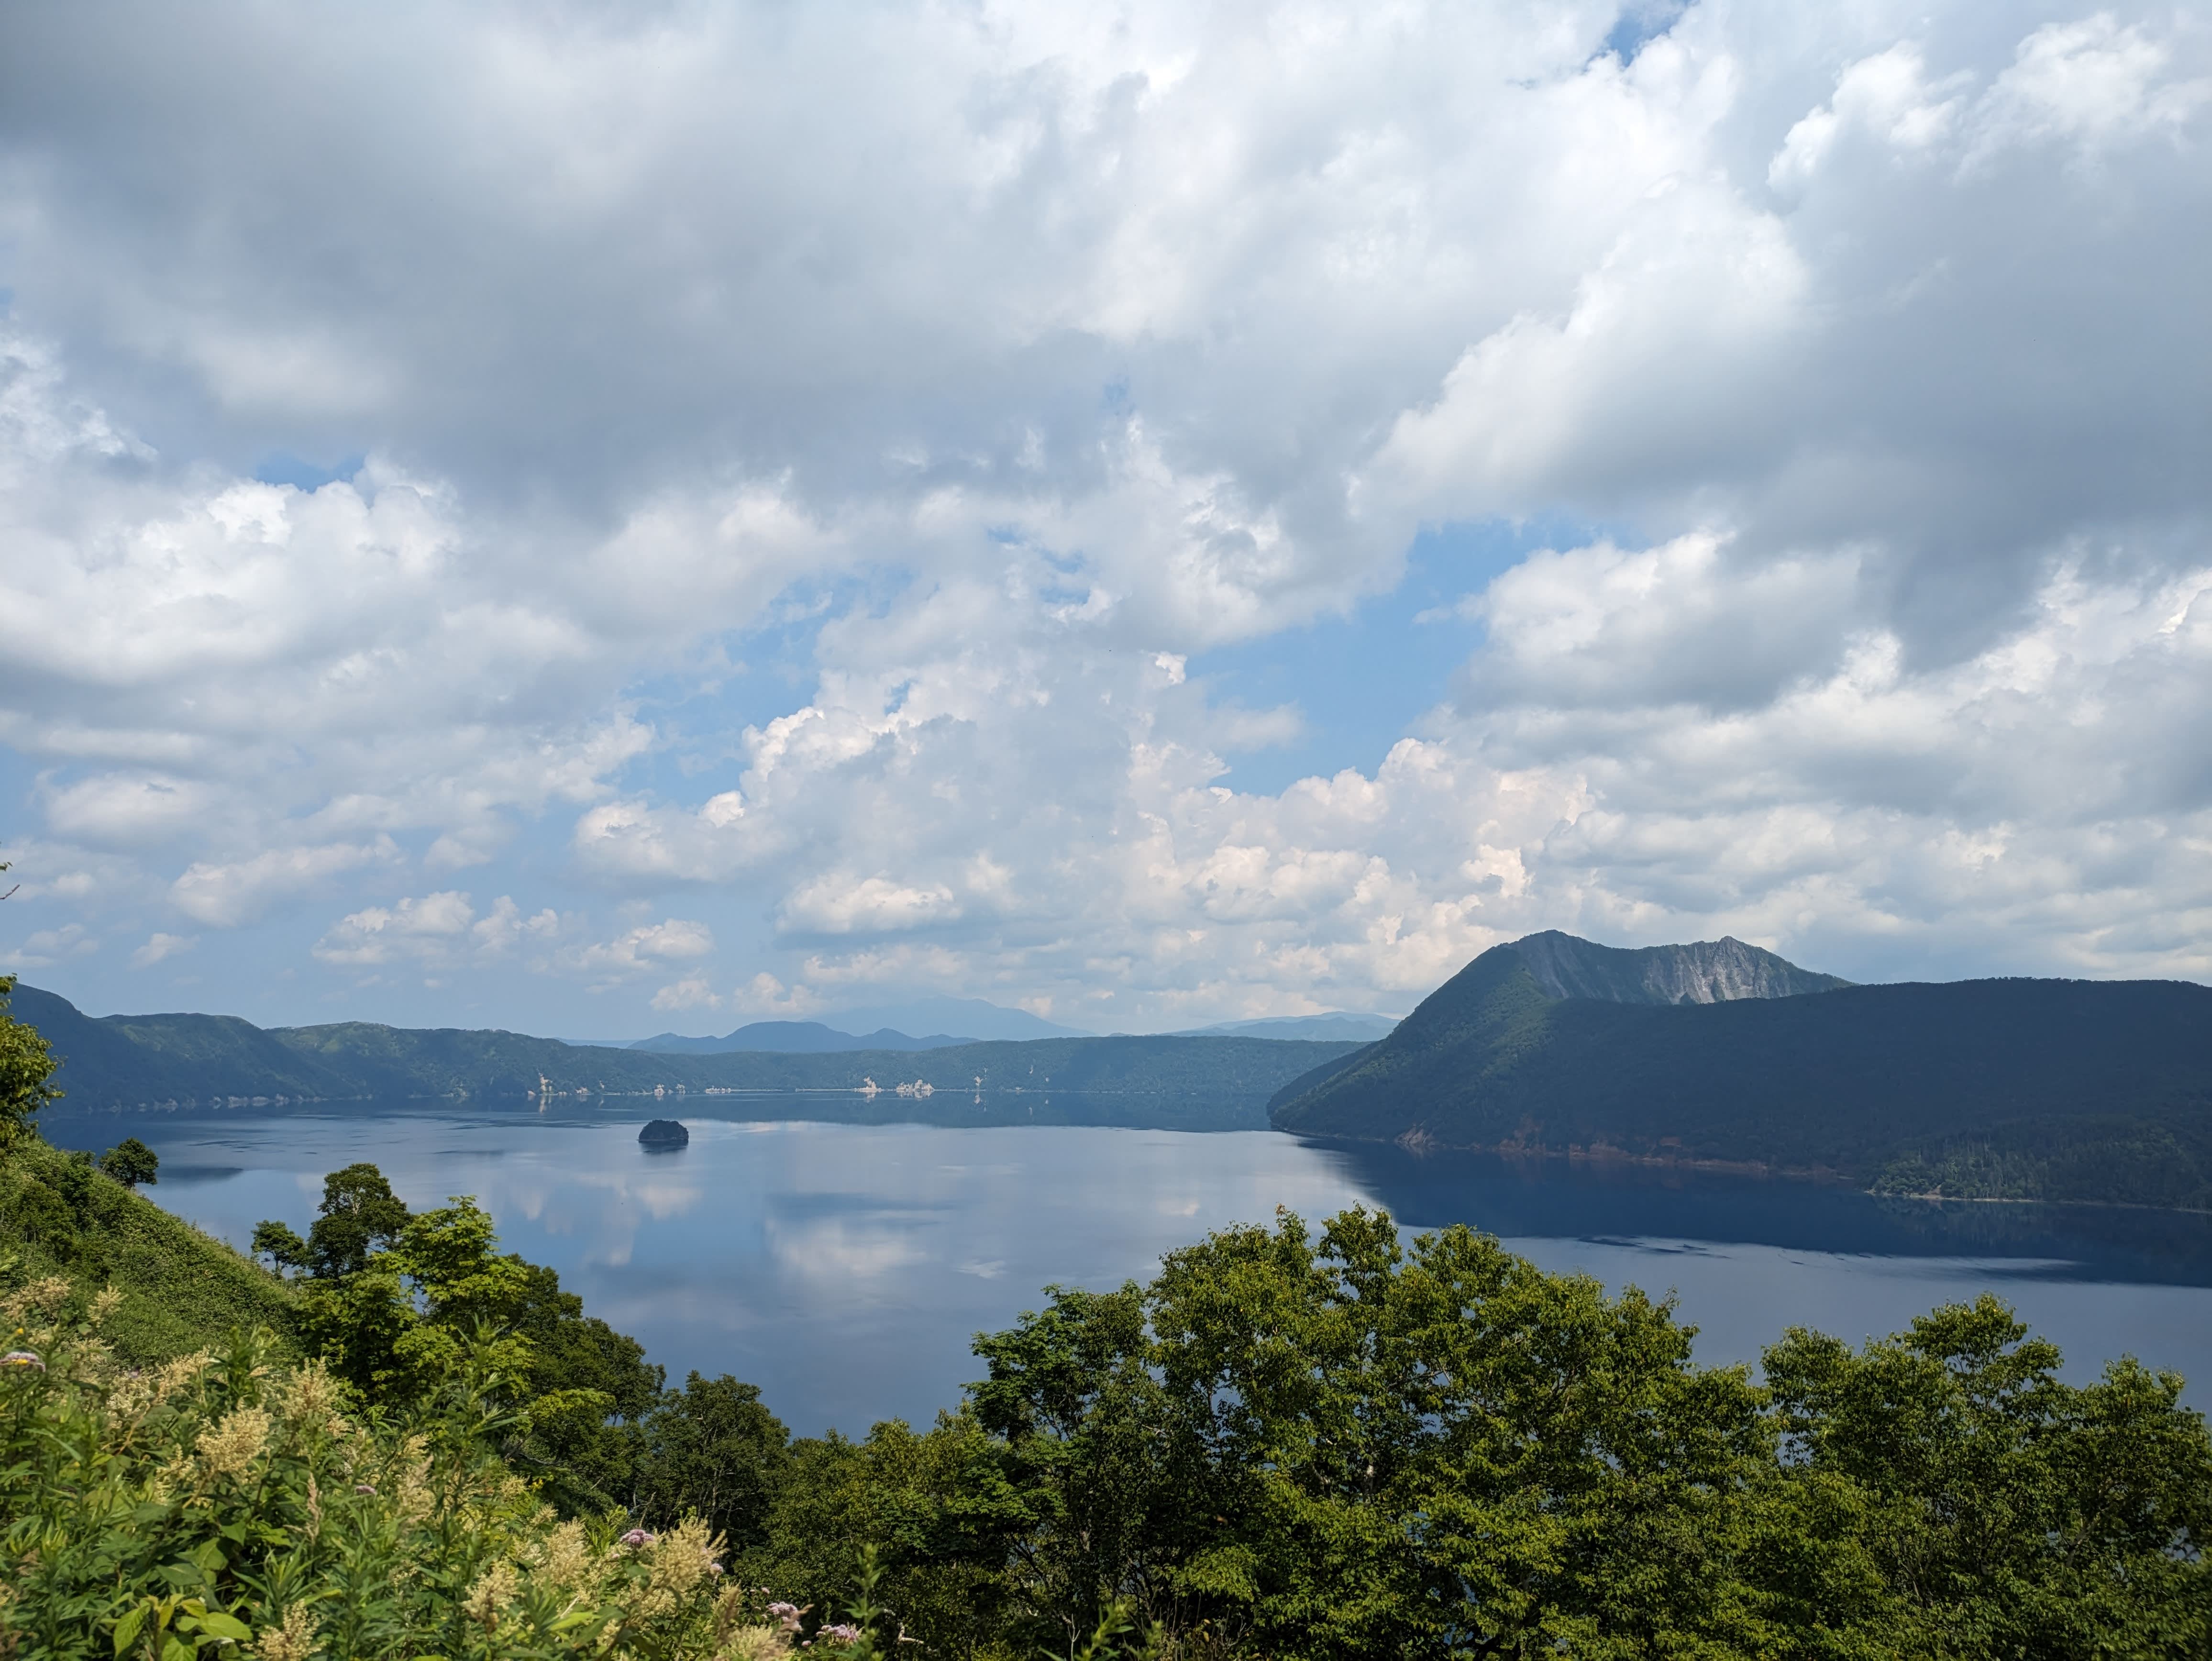 Lake Mashu's blue surface reflects the legions of cloud soaring across the sky.